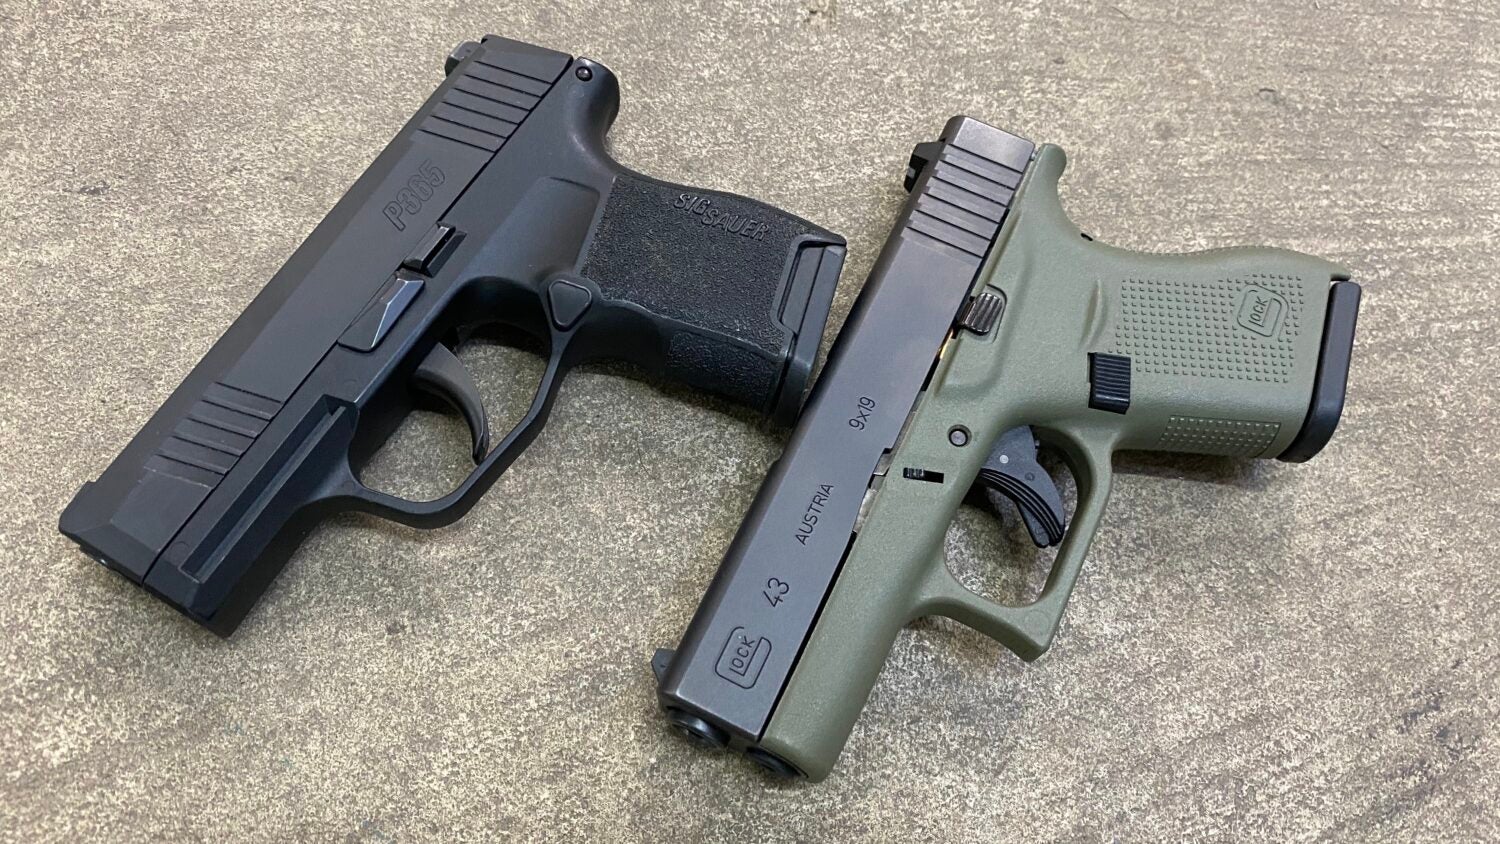 Concealed Carry Corner: The Major Problems With Lightweight Pistols